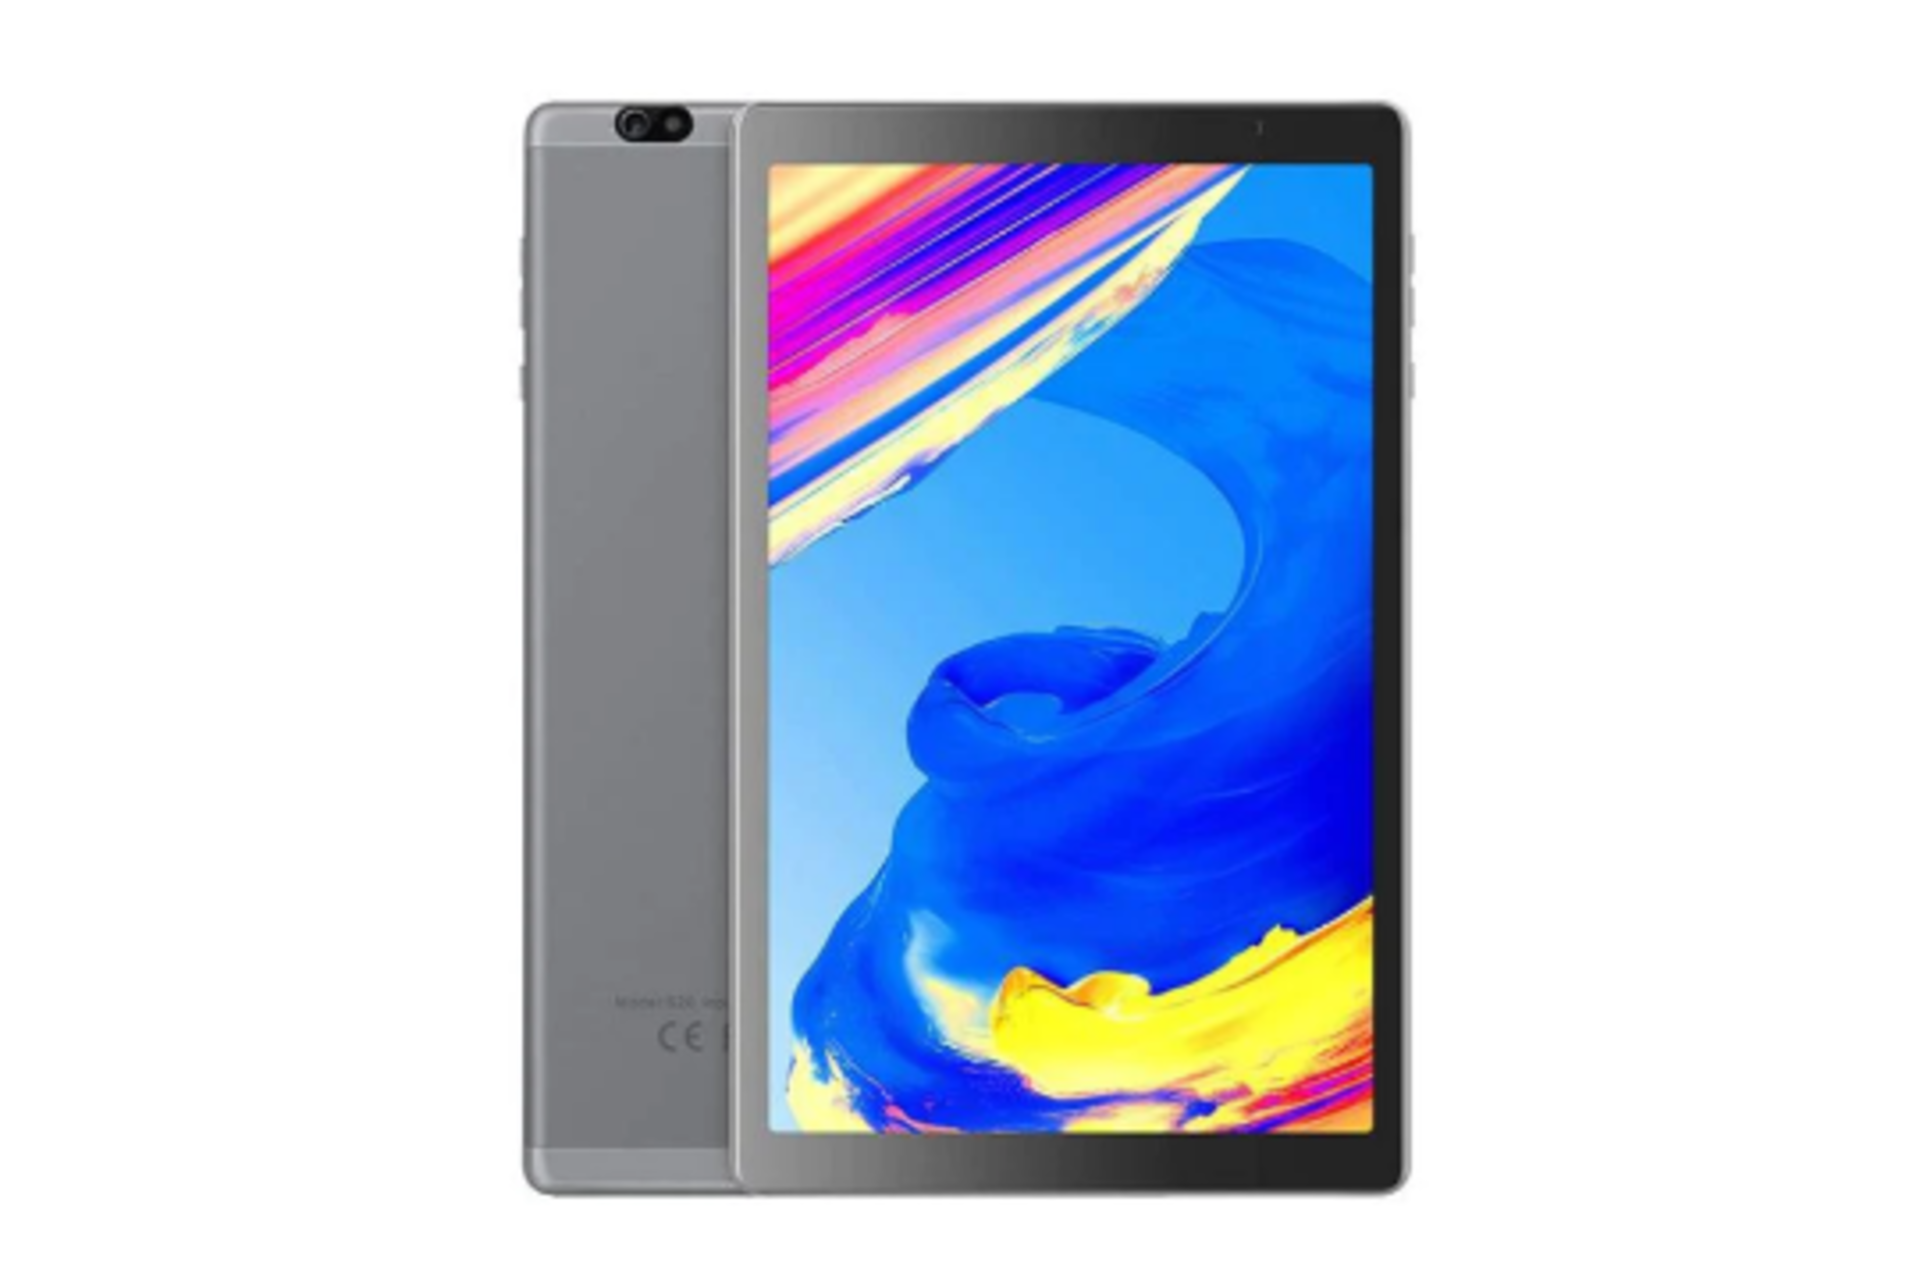 New Boxed Vankyo MatrixPad S20 Android Tablet, Android 9.0 Pie, Octa-Core Processor, 10 inch, 3GB